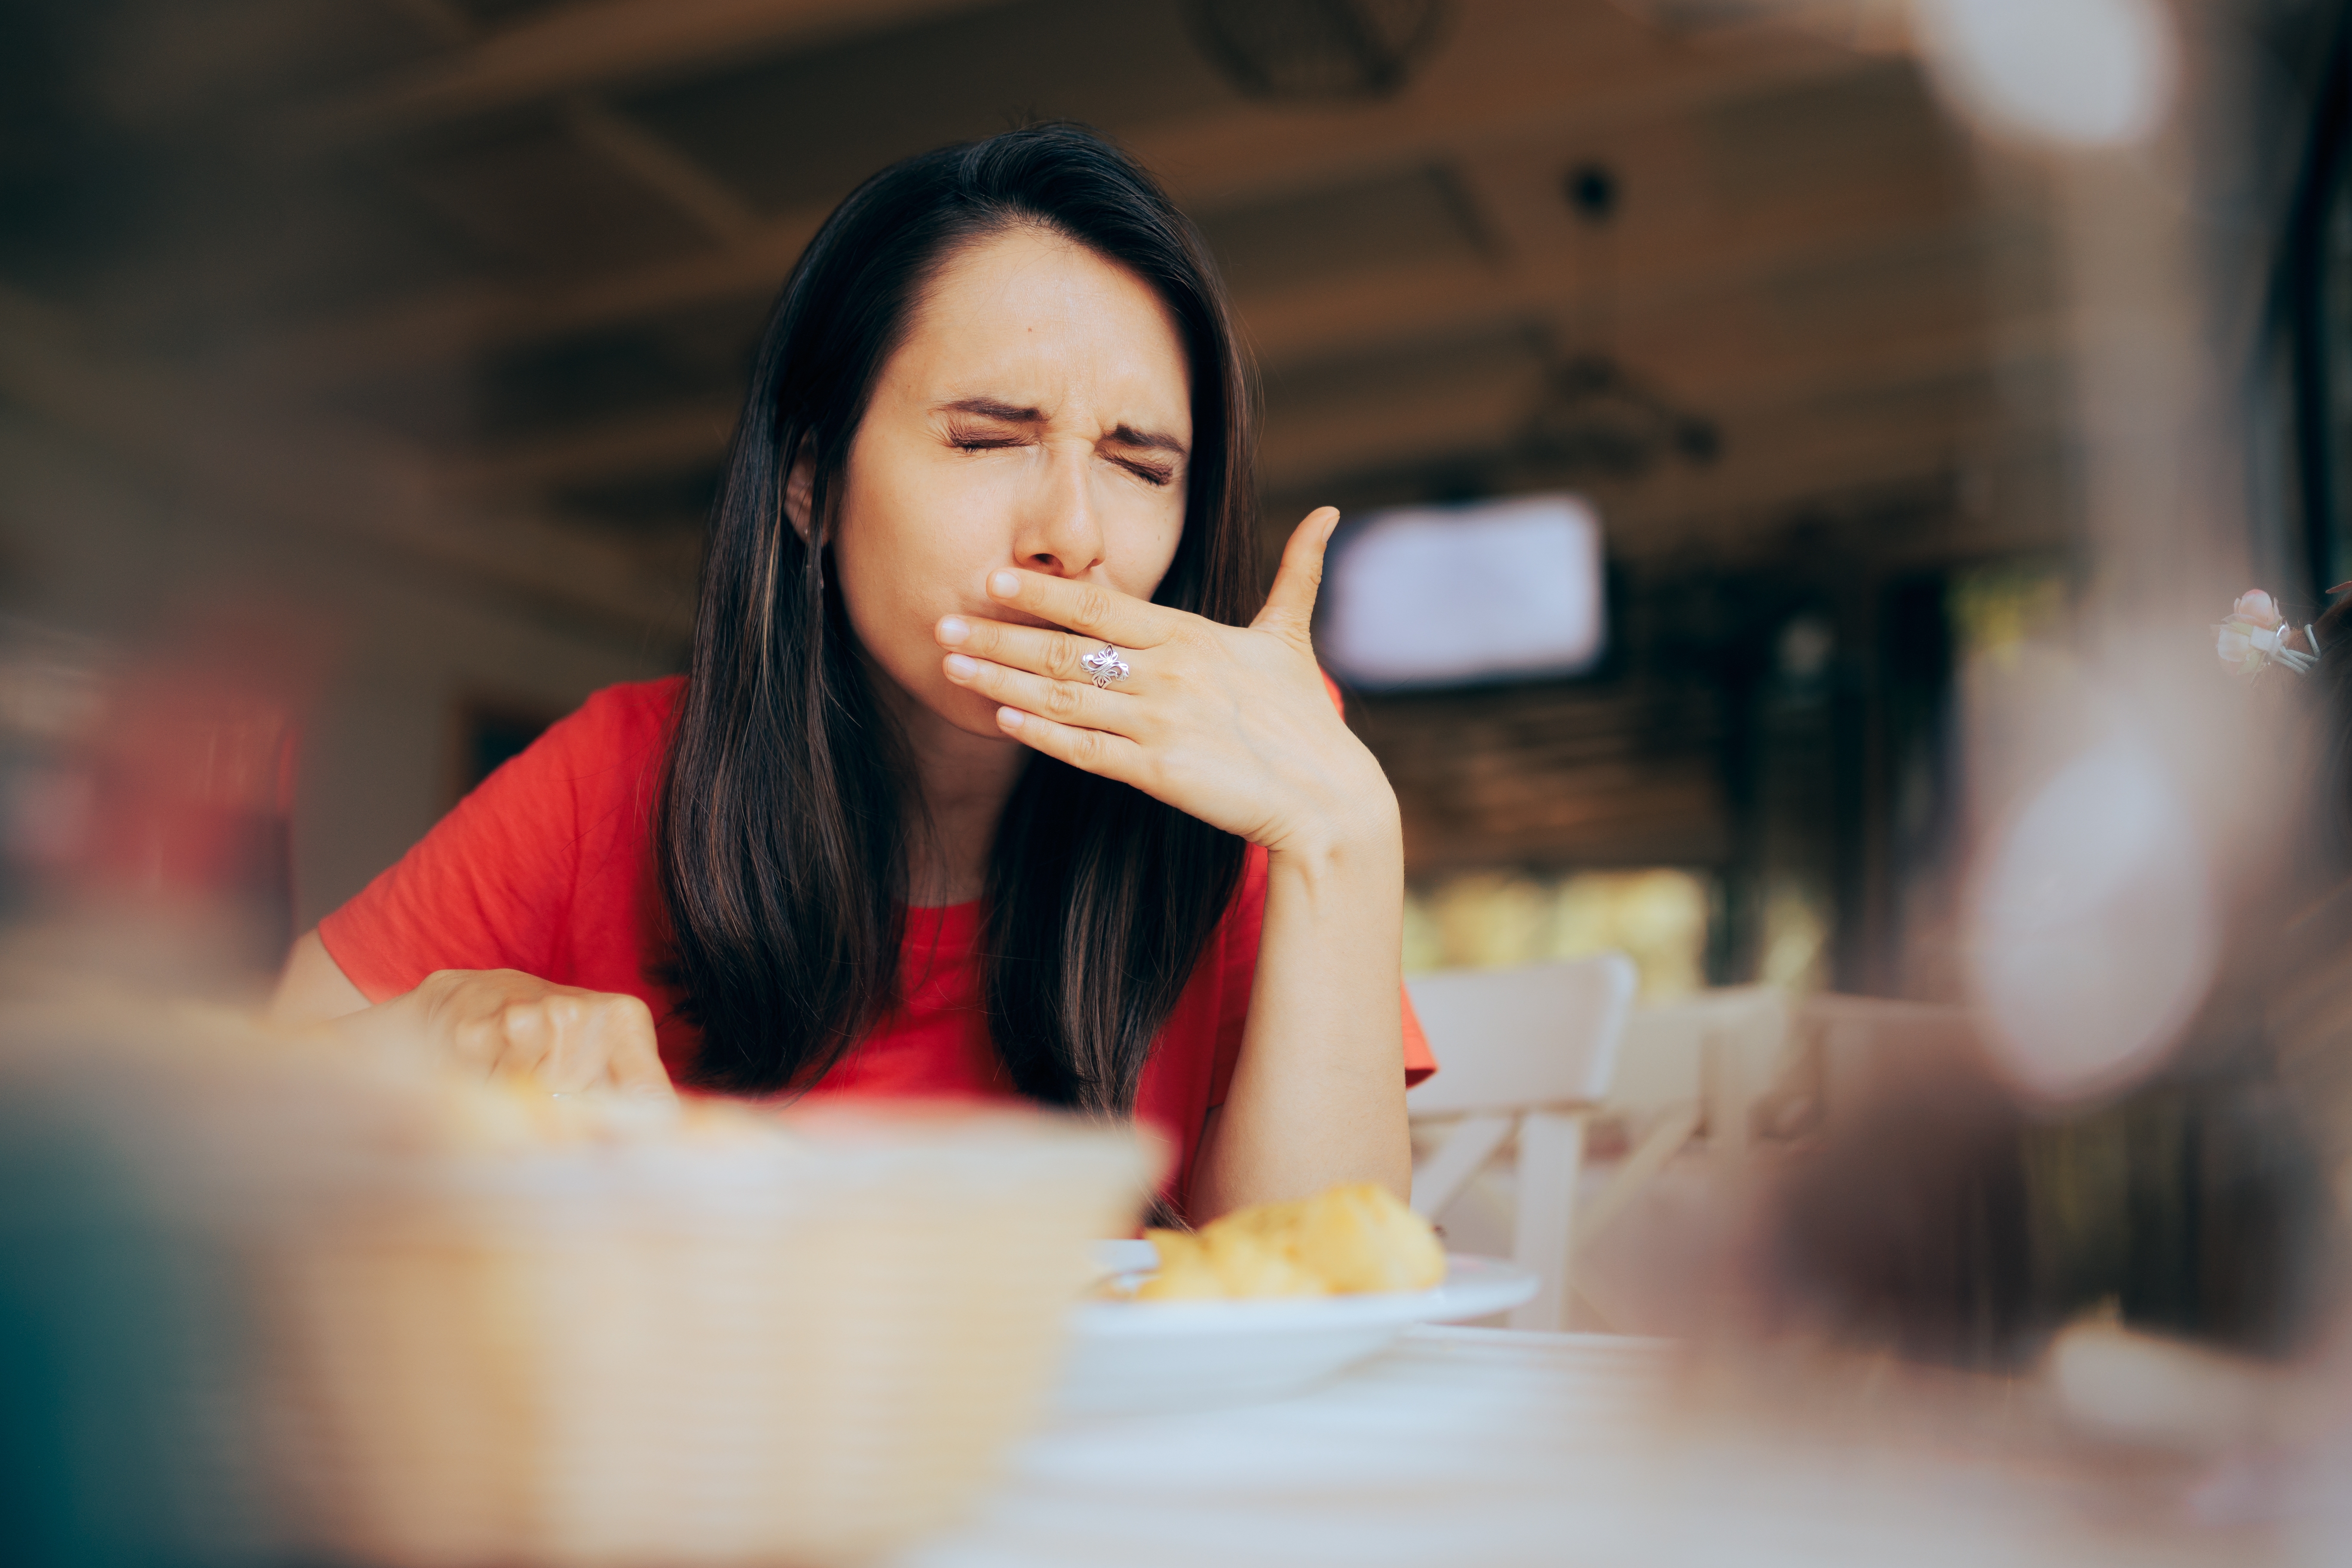 A woman feels discomfort while eating food | Source: Shutterstock